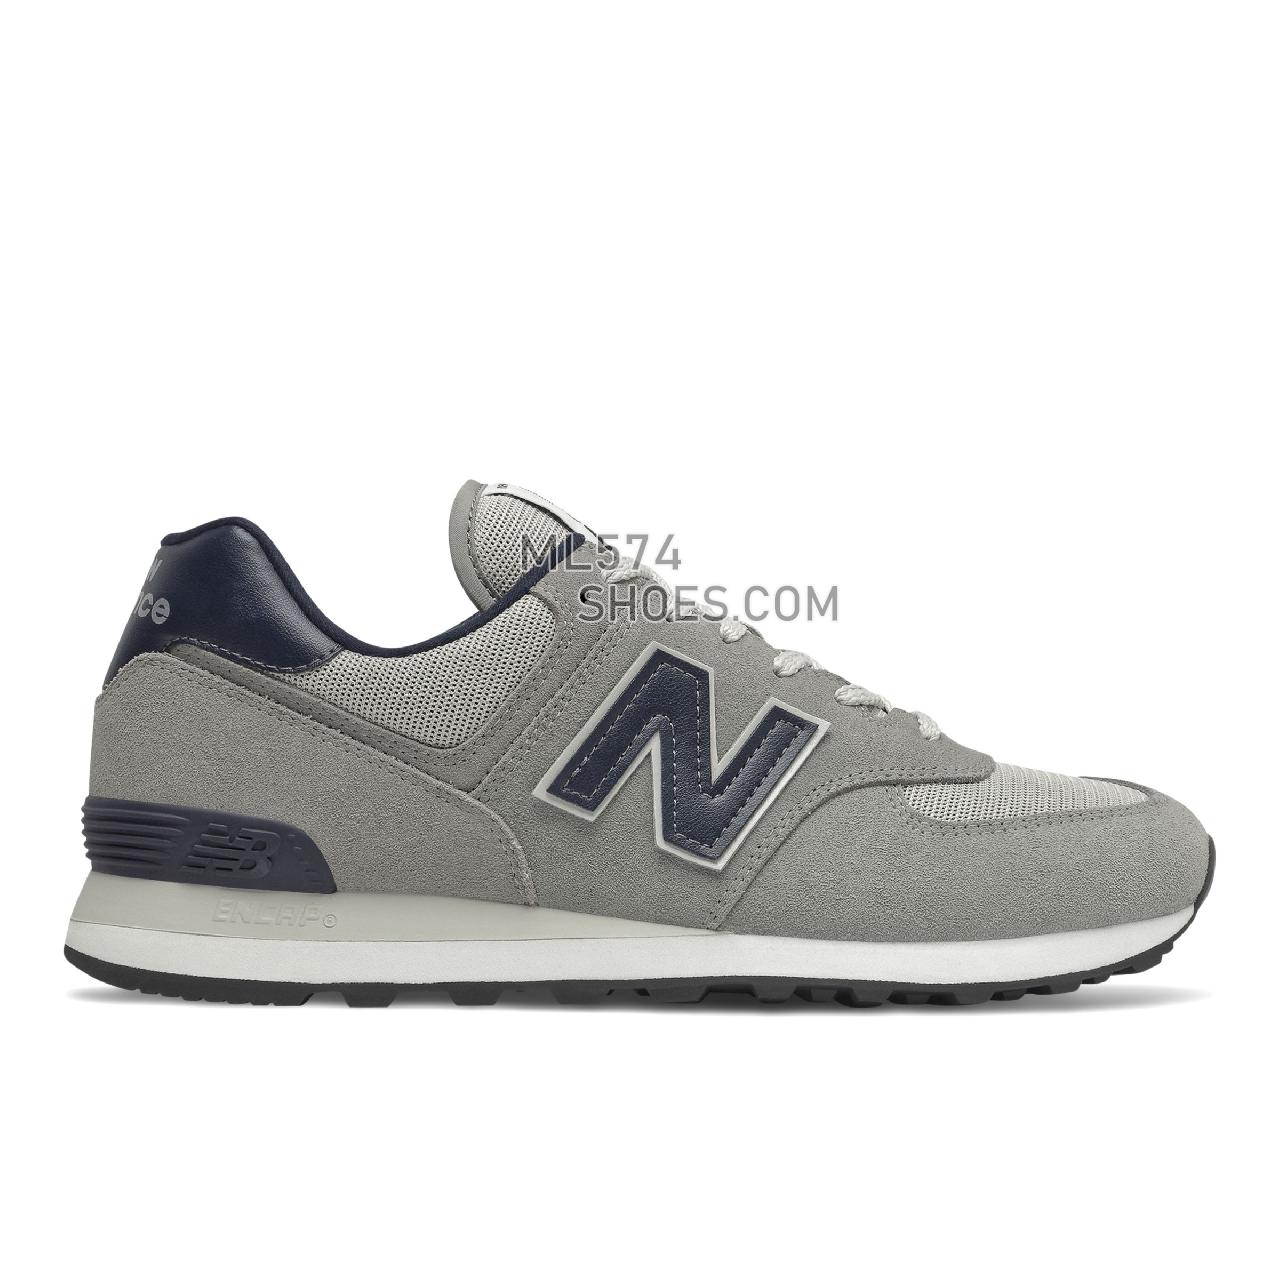 New Balance 574v2 - Men's Sport Style Sneakers - Grey with Navy - ML574BE2